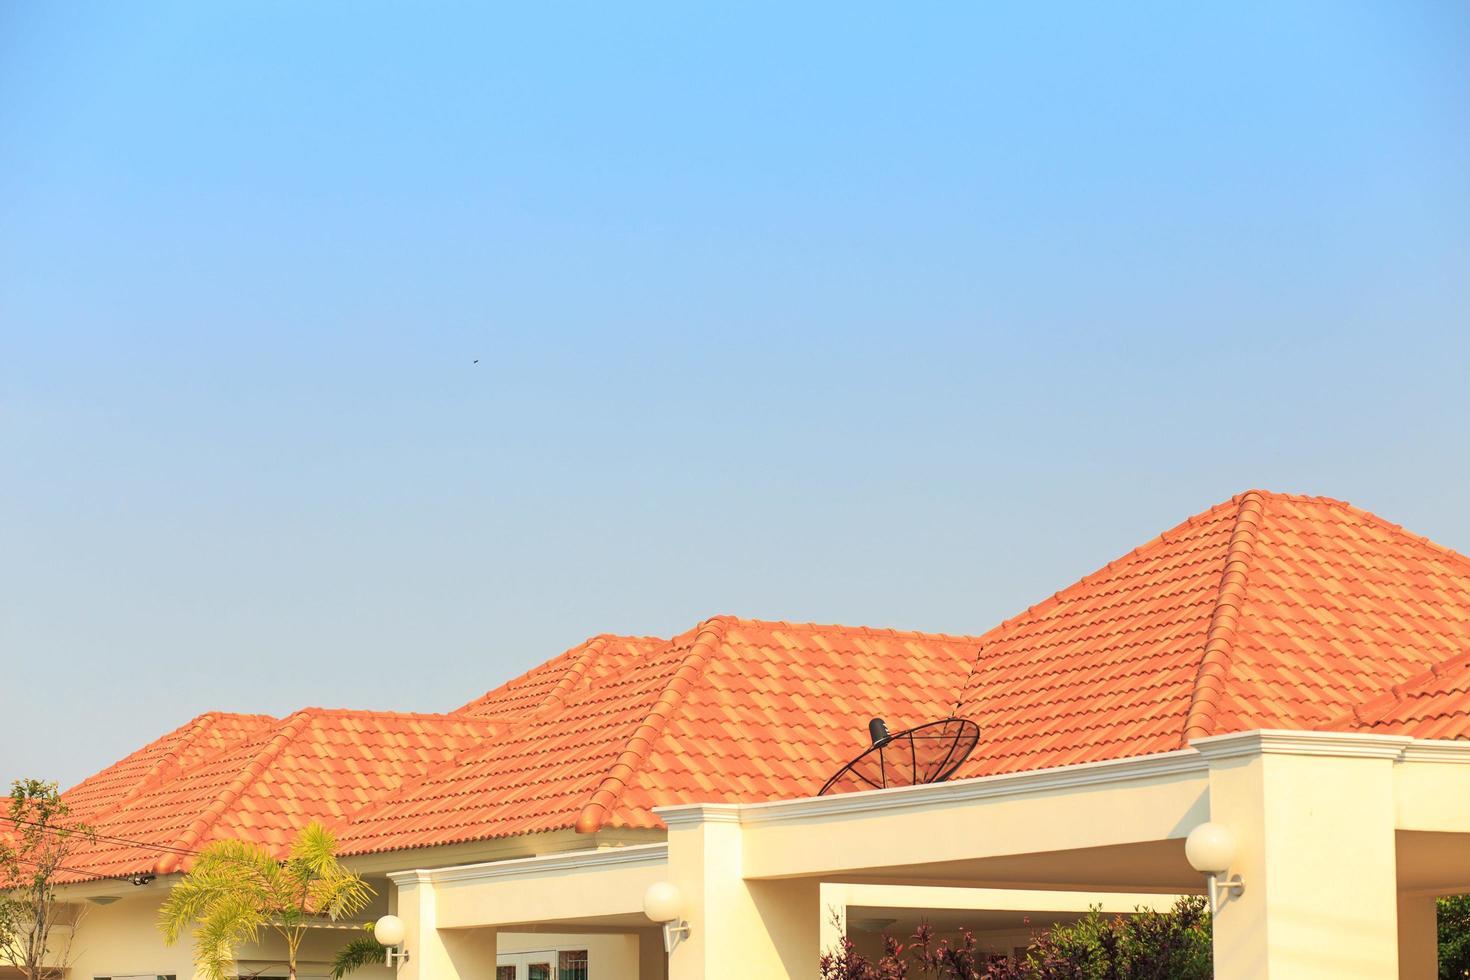 WeServe house with orange tile shingles on the roof against a blue sky